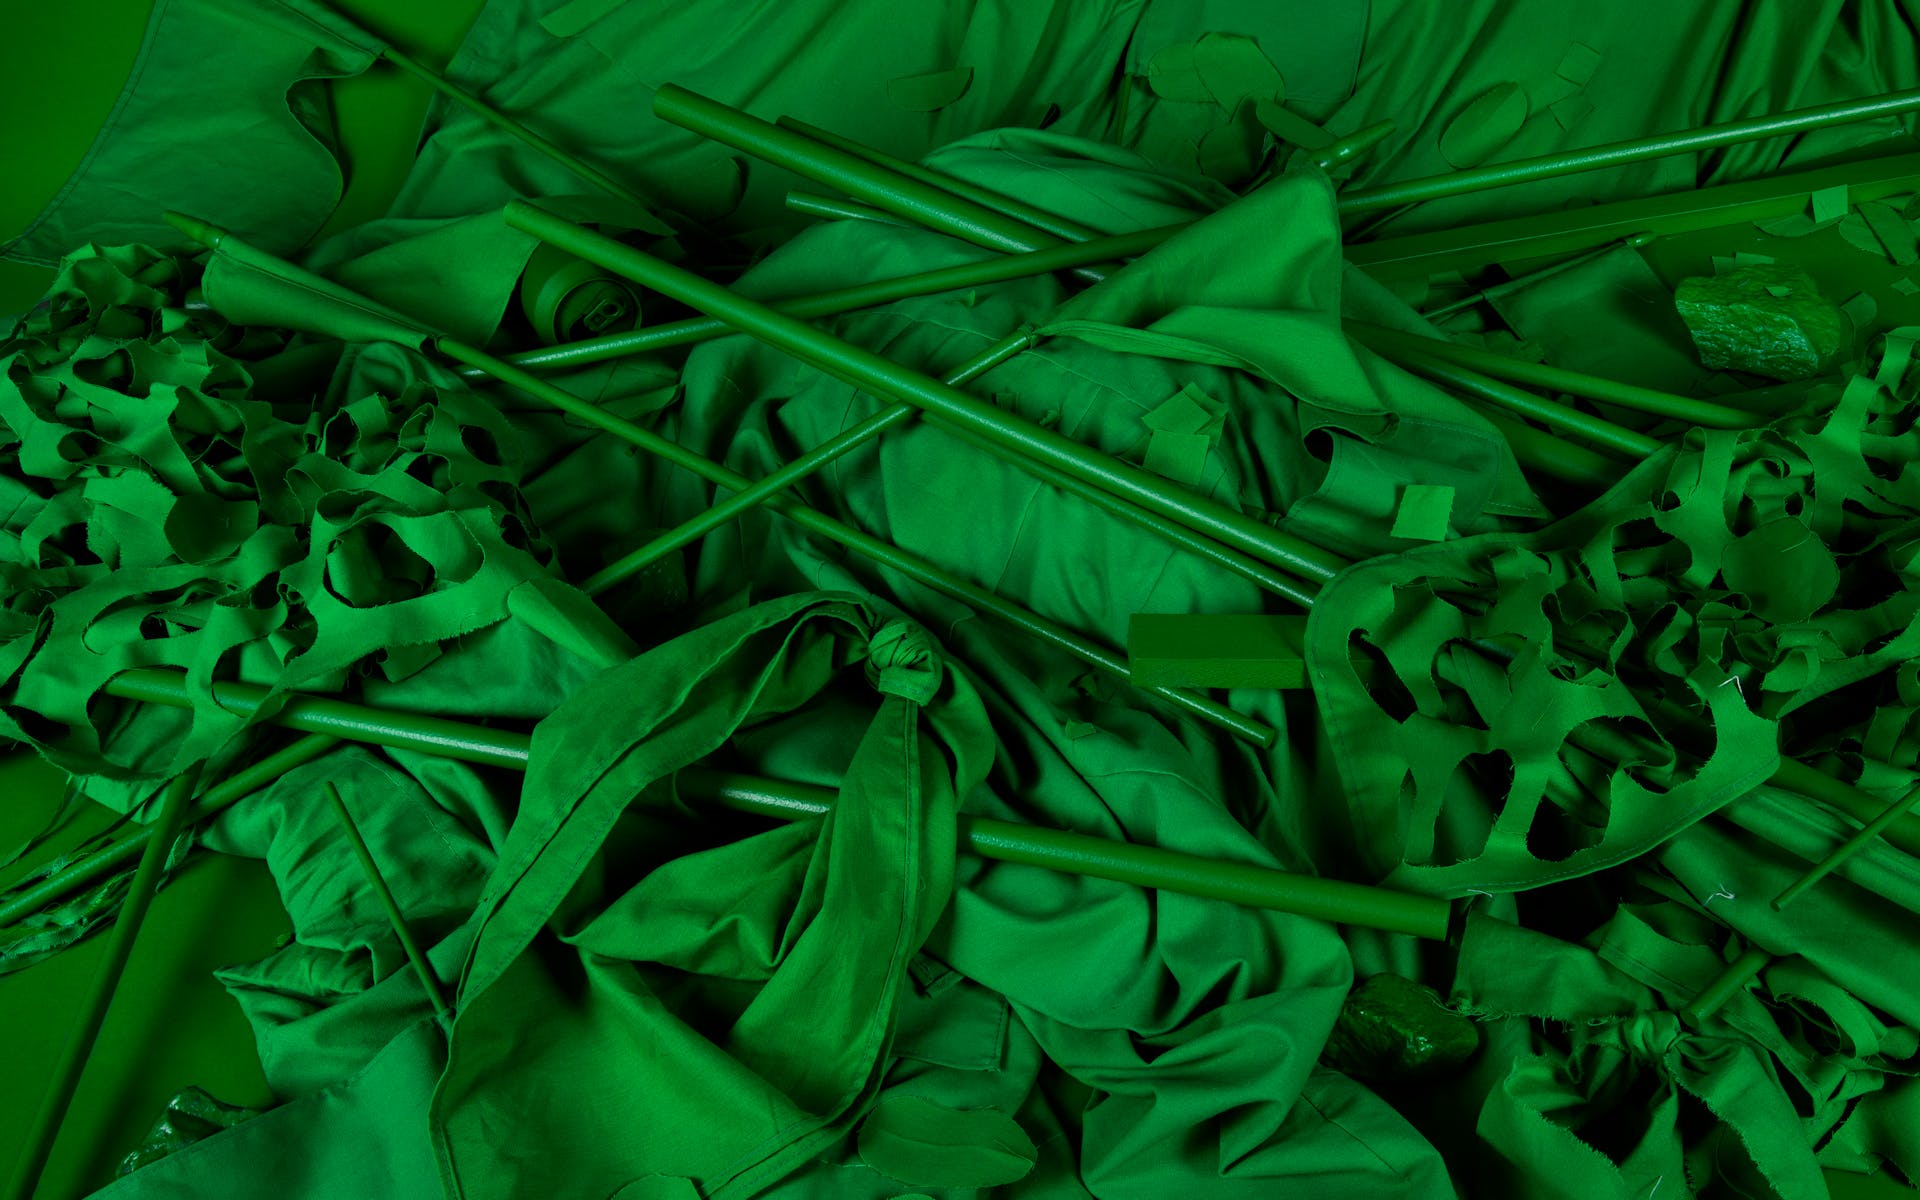 Image of all green fabrics and poles